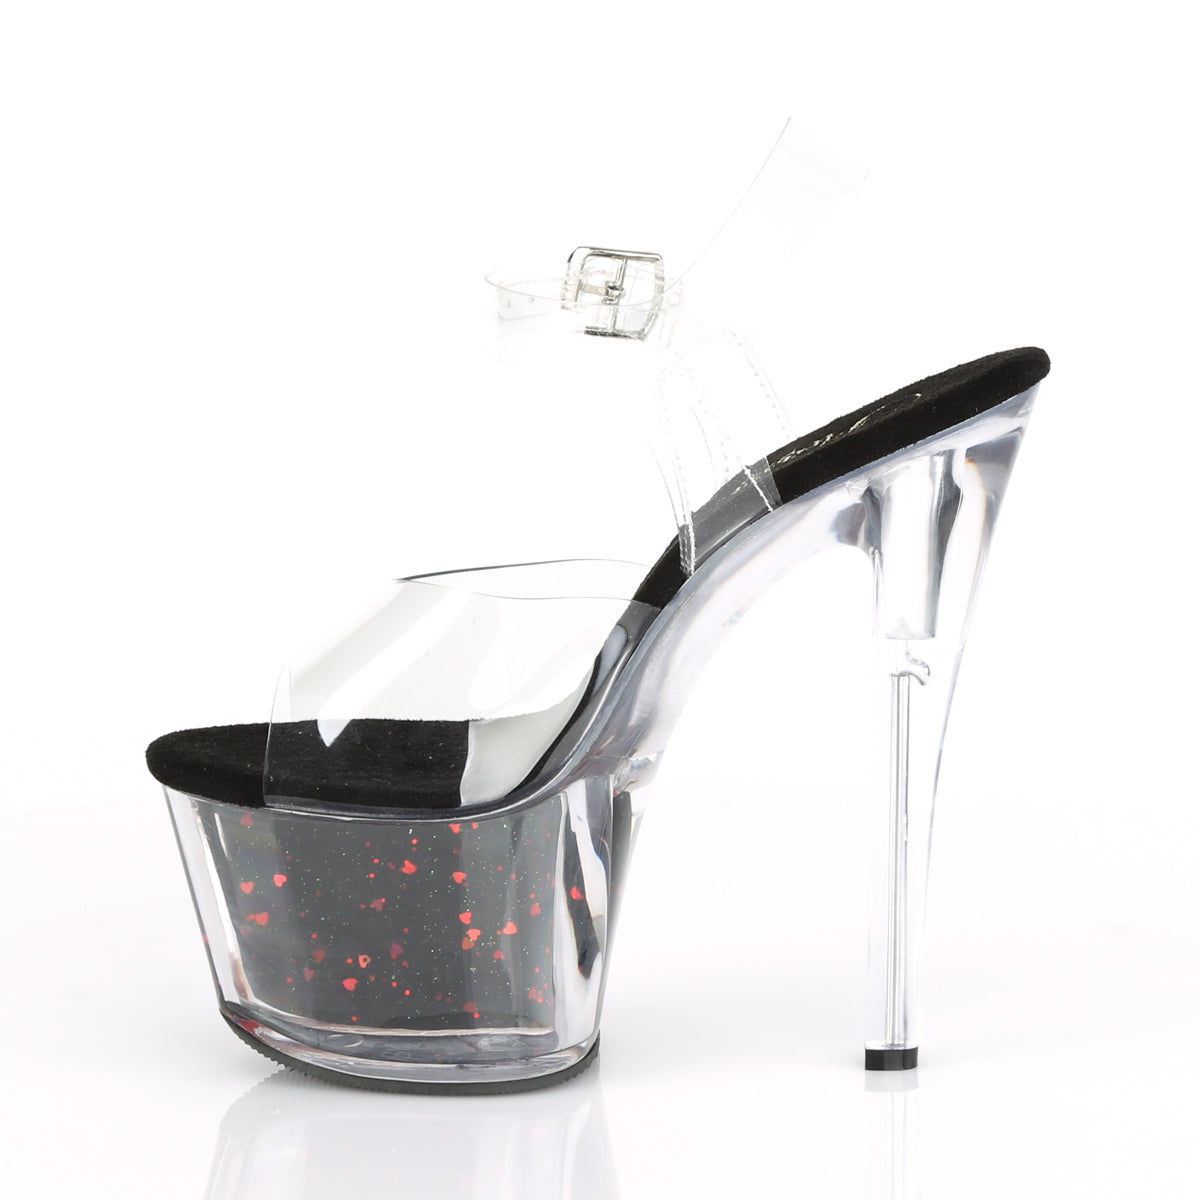 SKY-308WHG 7" Heel ClearBlack with Red Pole Dancing Platform-Pleaser- Sexy Shoes Pole Dance Heels